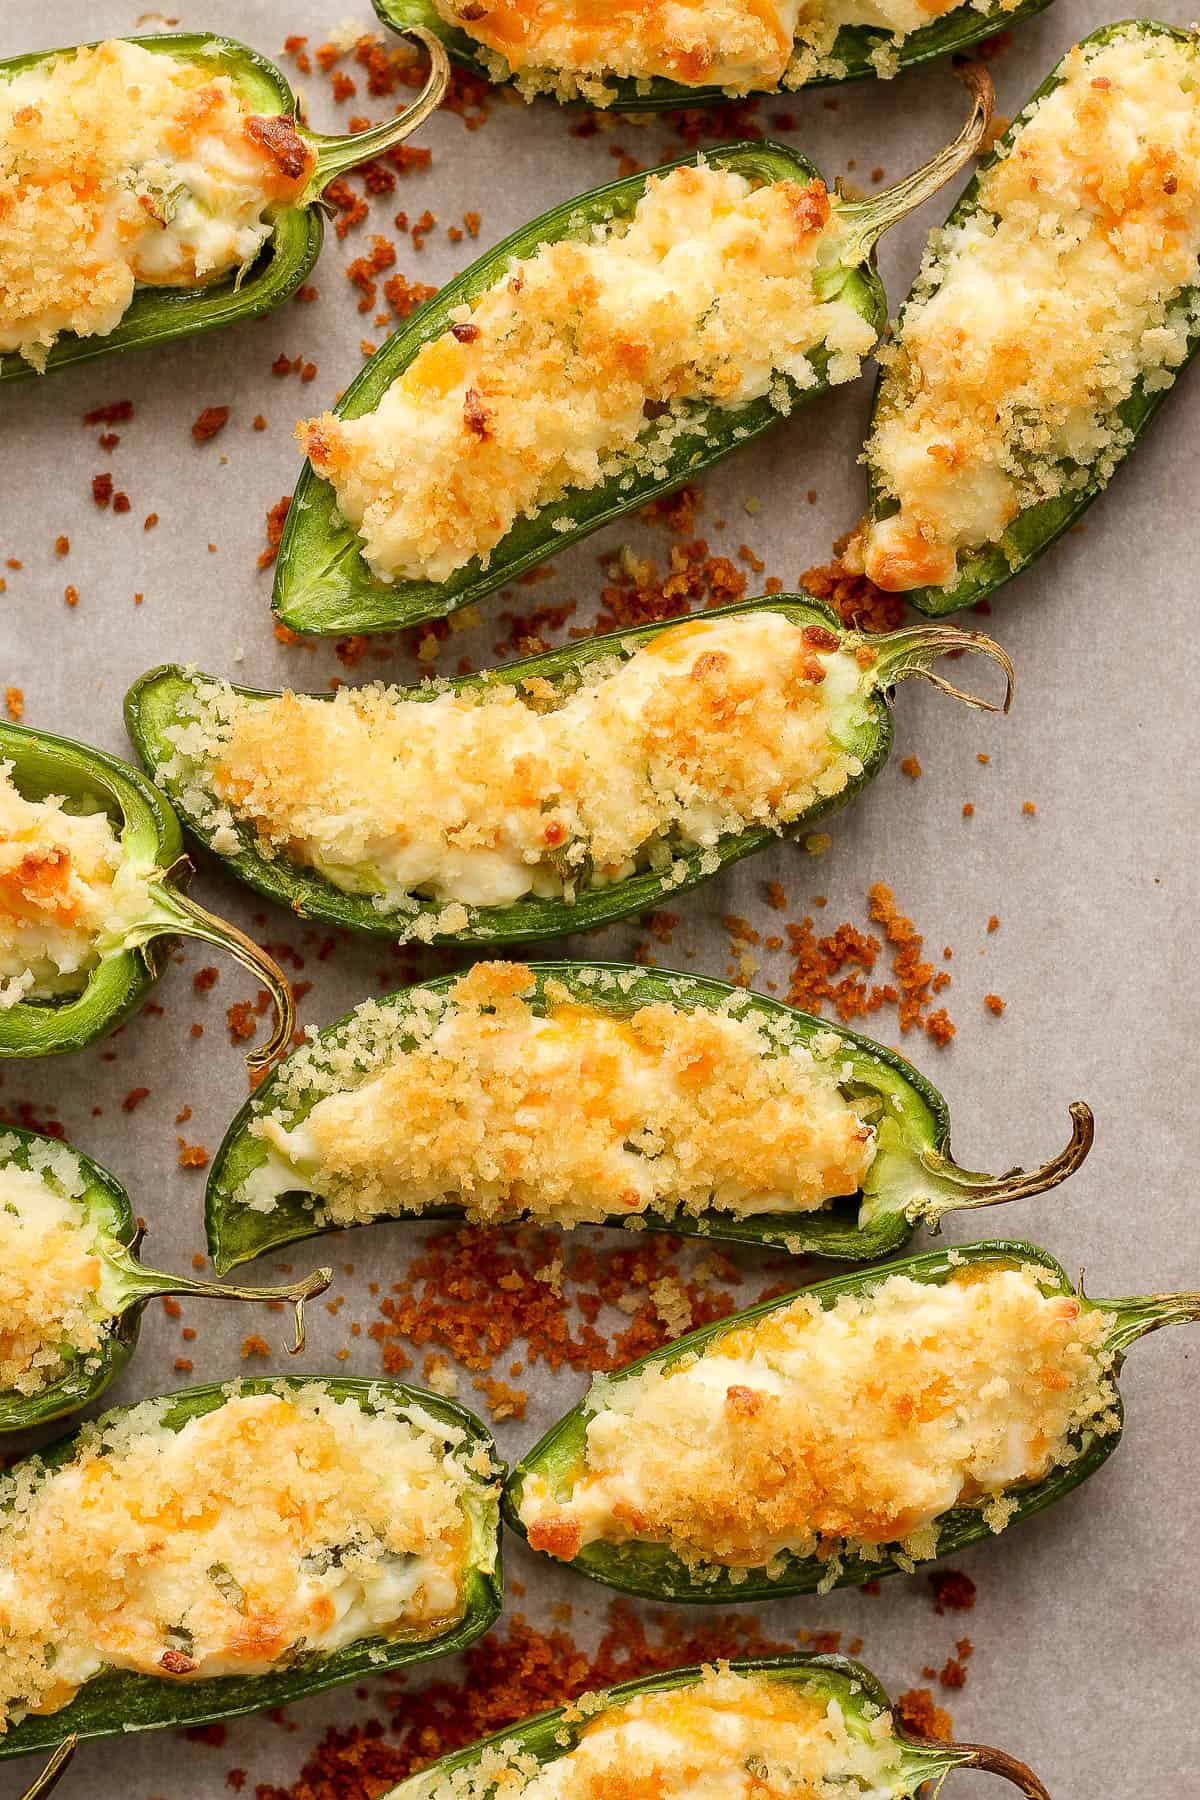 Crispy jalapeno peppers topped with panko breadcrumbs on a baking sheet.